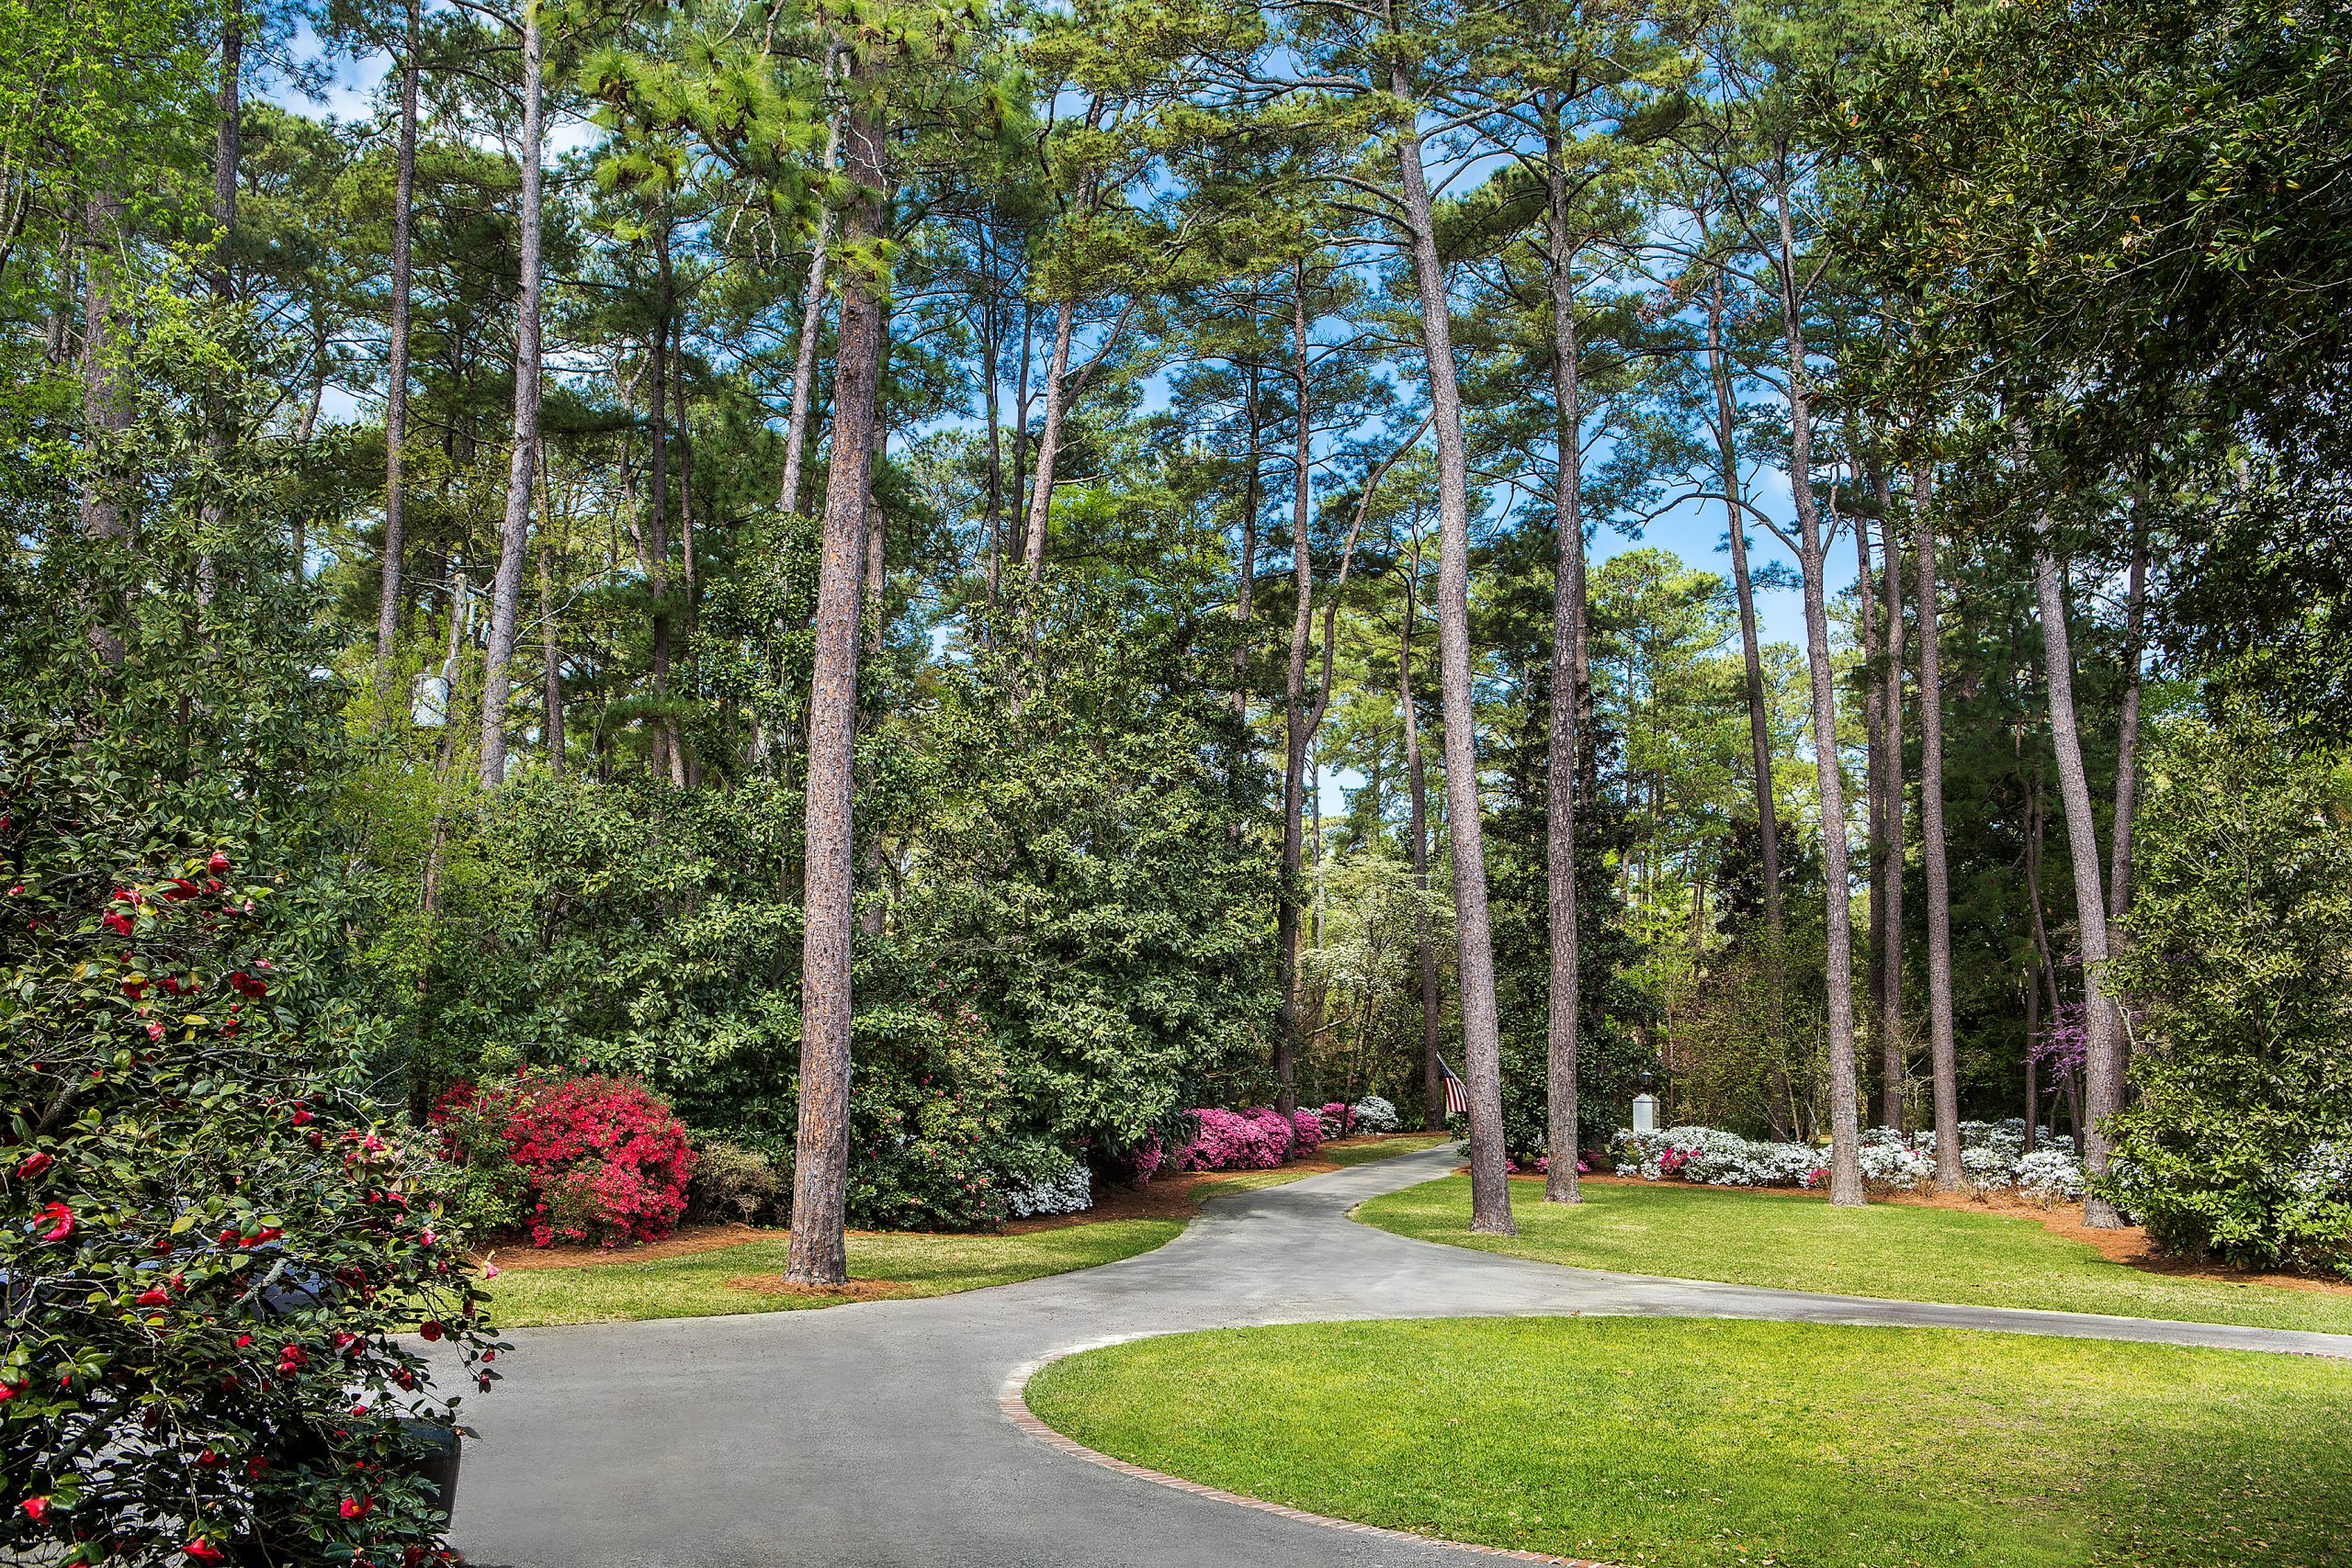 The Malanuks’ driveway meanders past runs of azaleas grouped by color, hydrangeas, and several kinds of magnolias. The open lawn is not only home to their kids, but home to all the neighborhood for football games and family gatherings. 